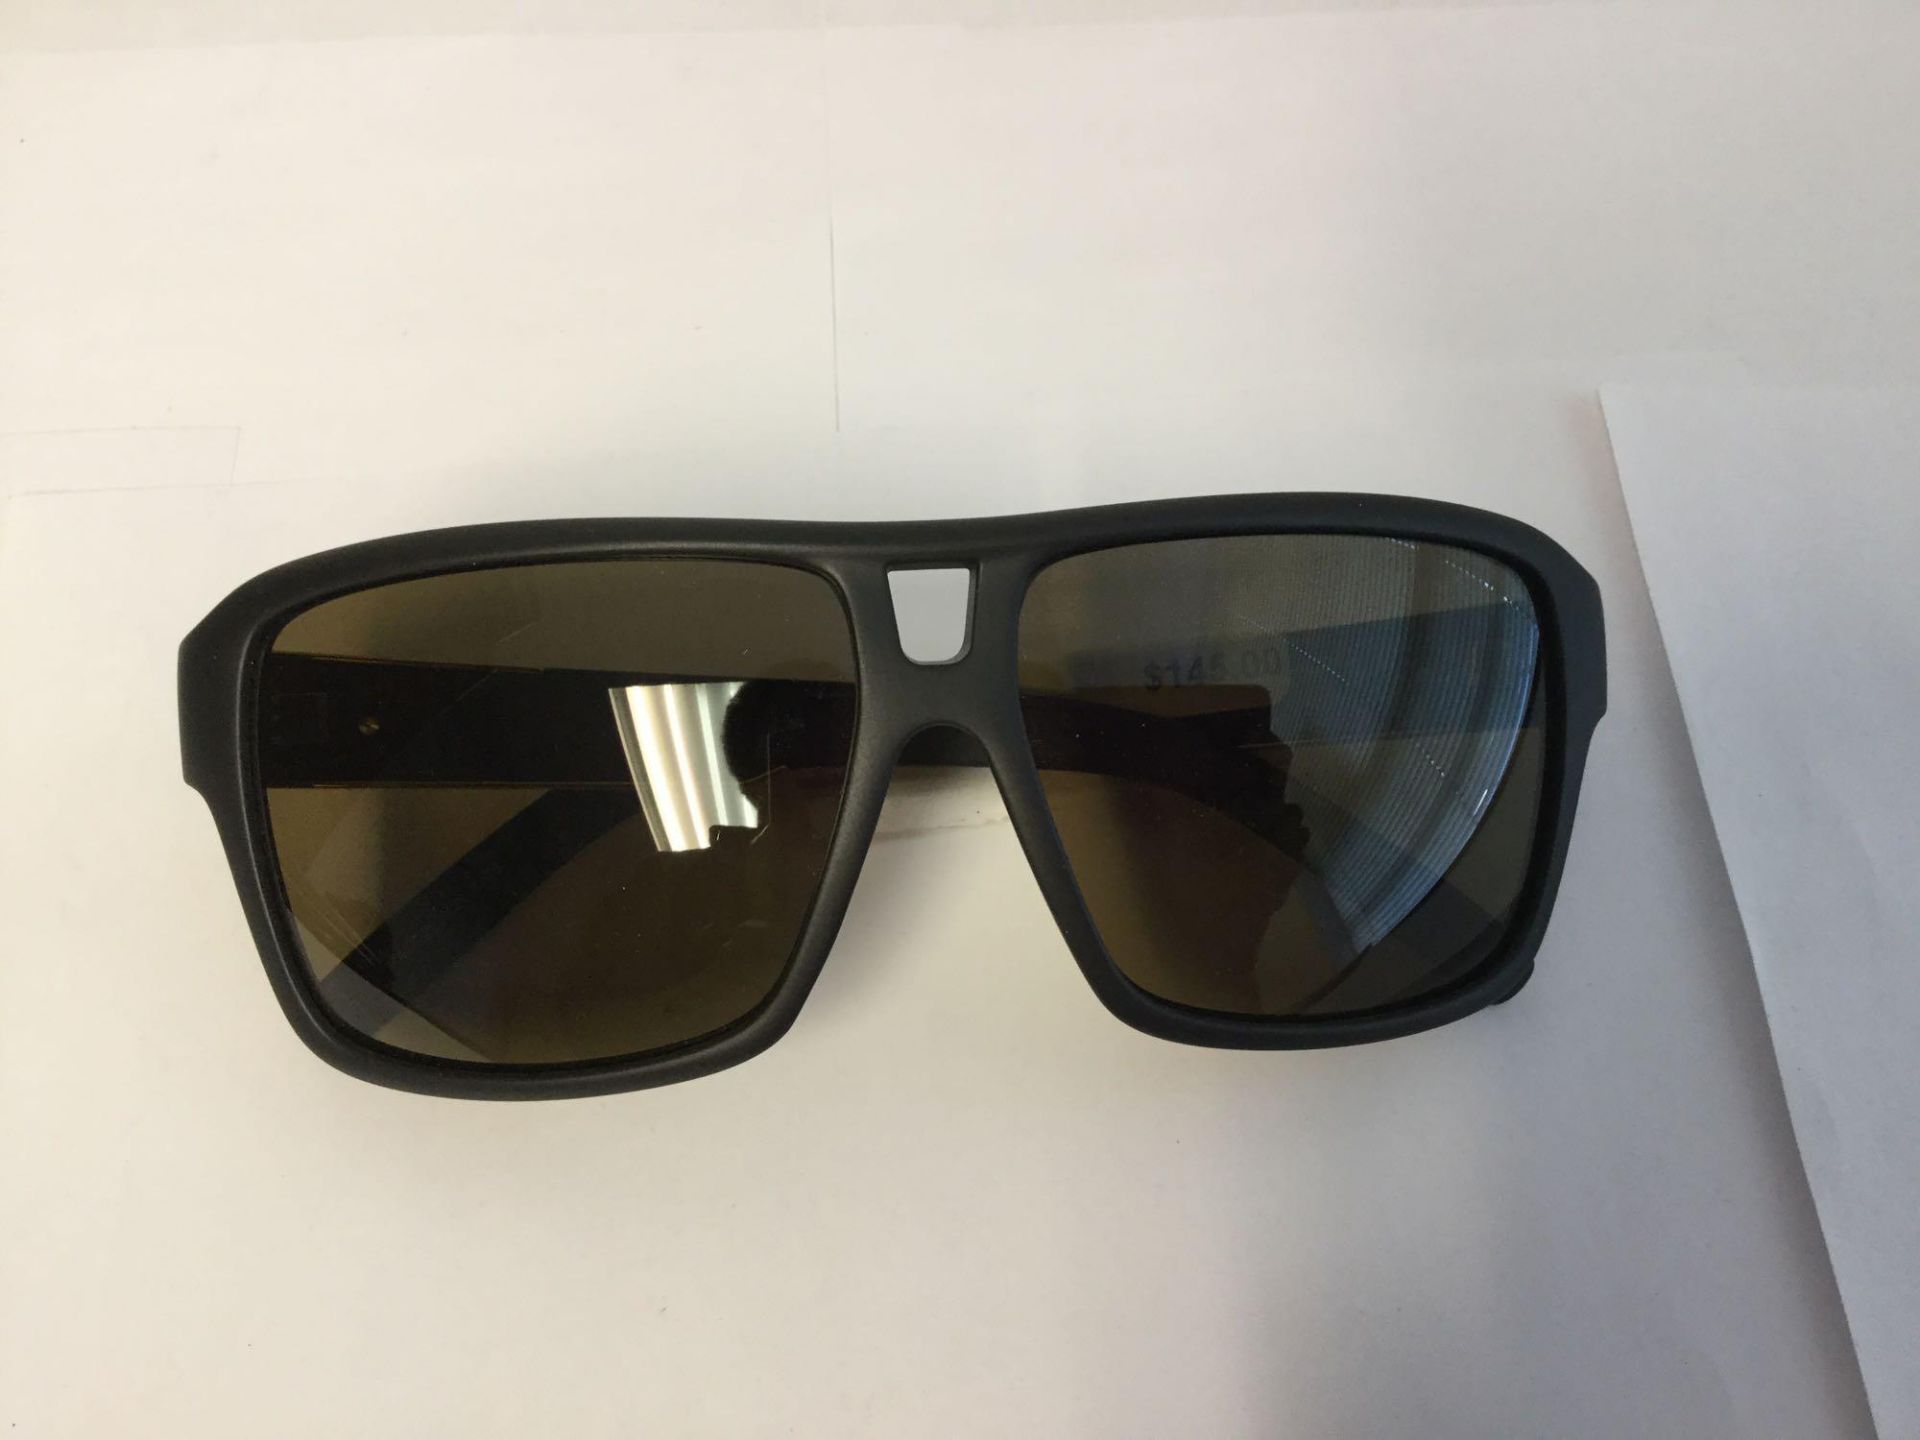 Dragon Alliance Sunglasses with Box and Bag value $ 145 - Image 2 of 4